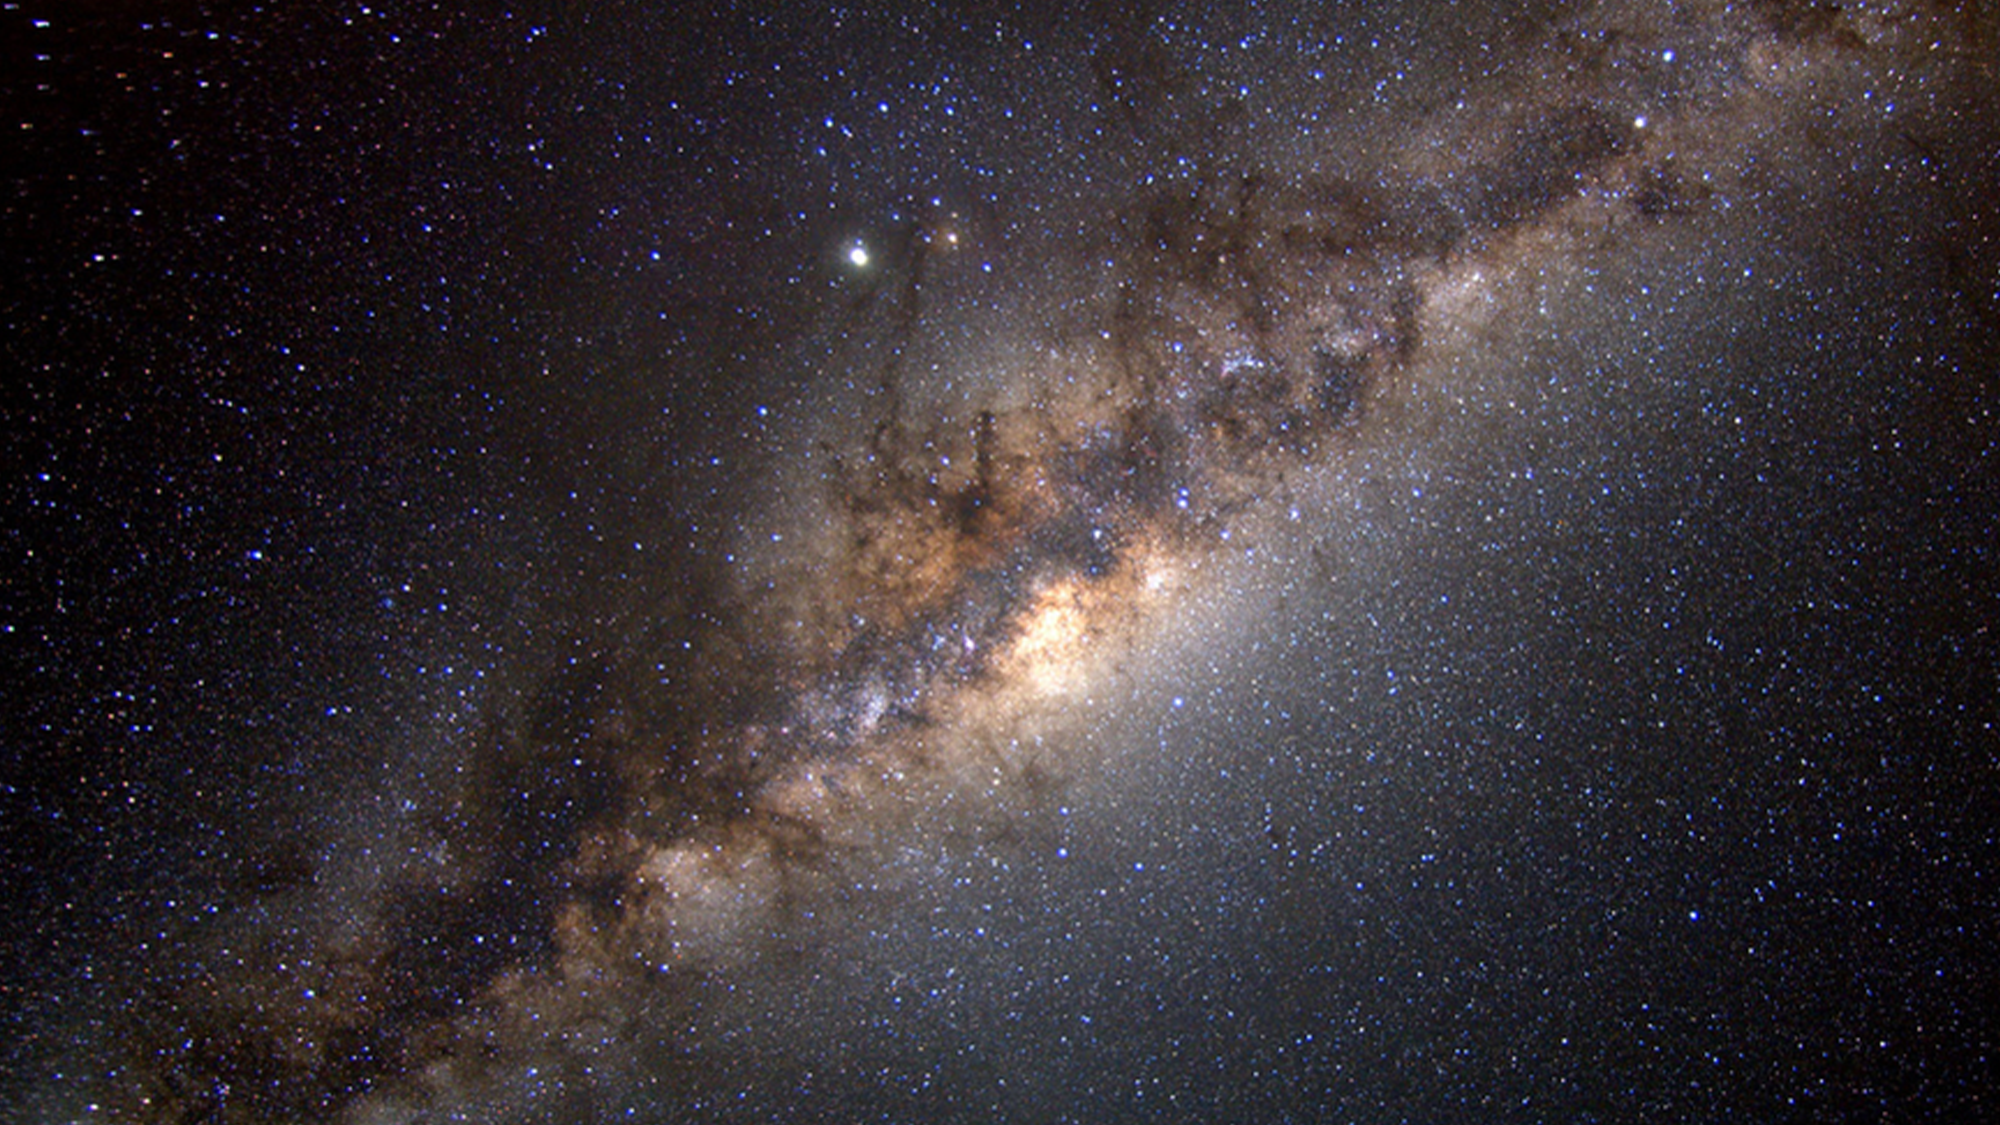 Oldest known stars in the universe found in the 'halo' of the Milky Way